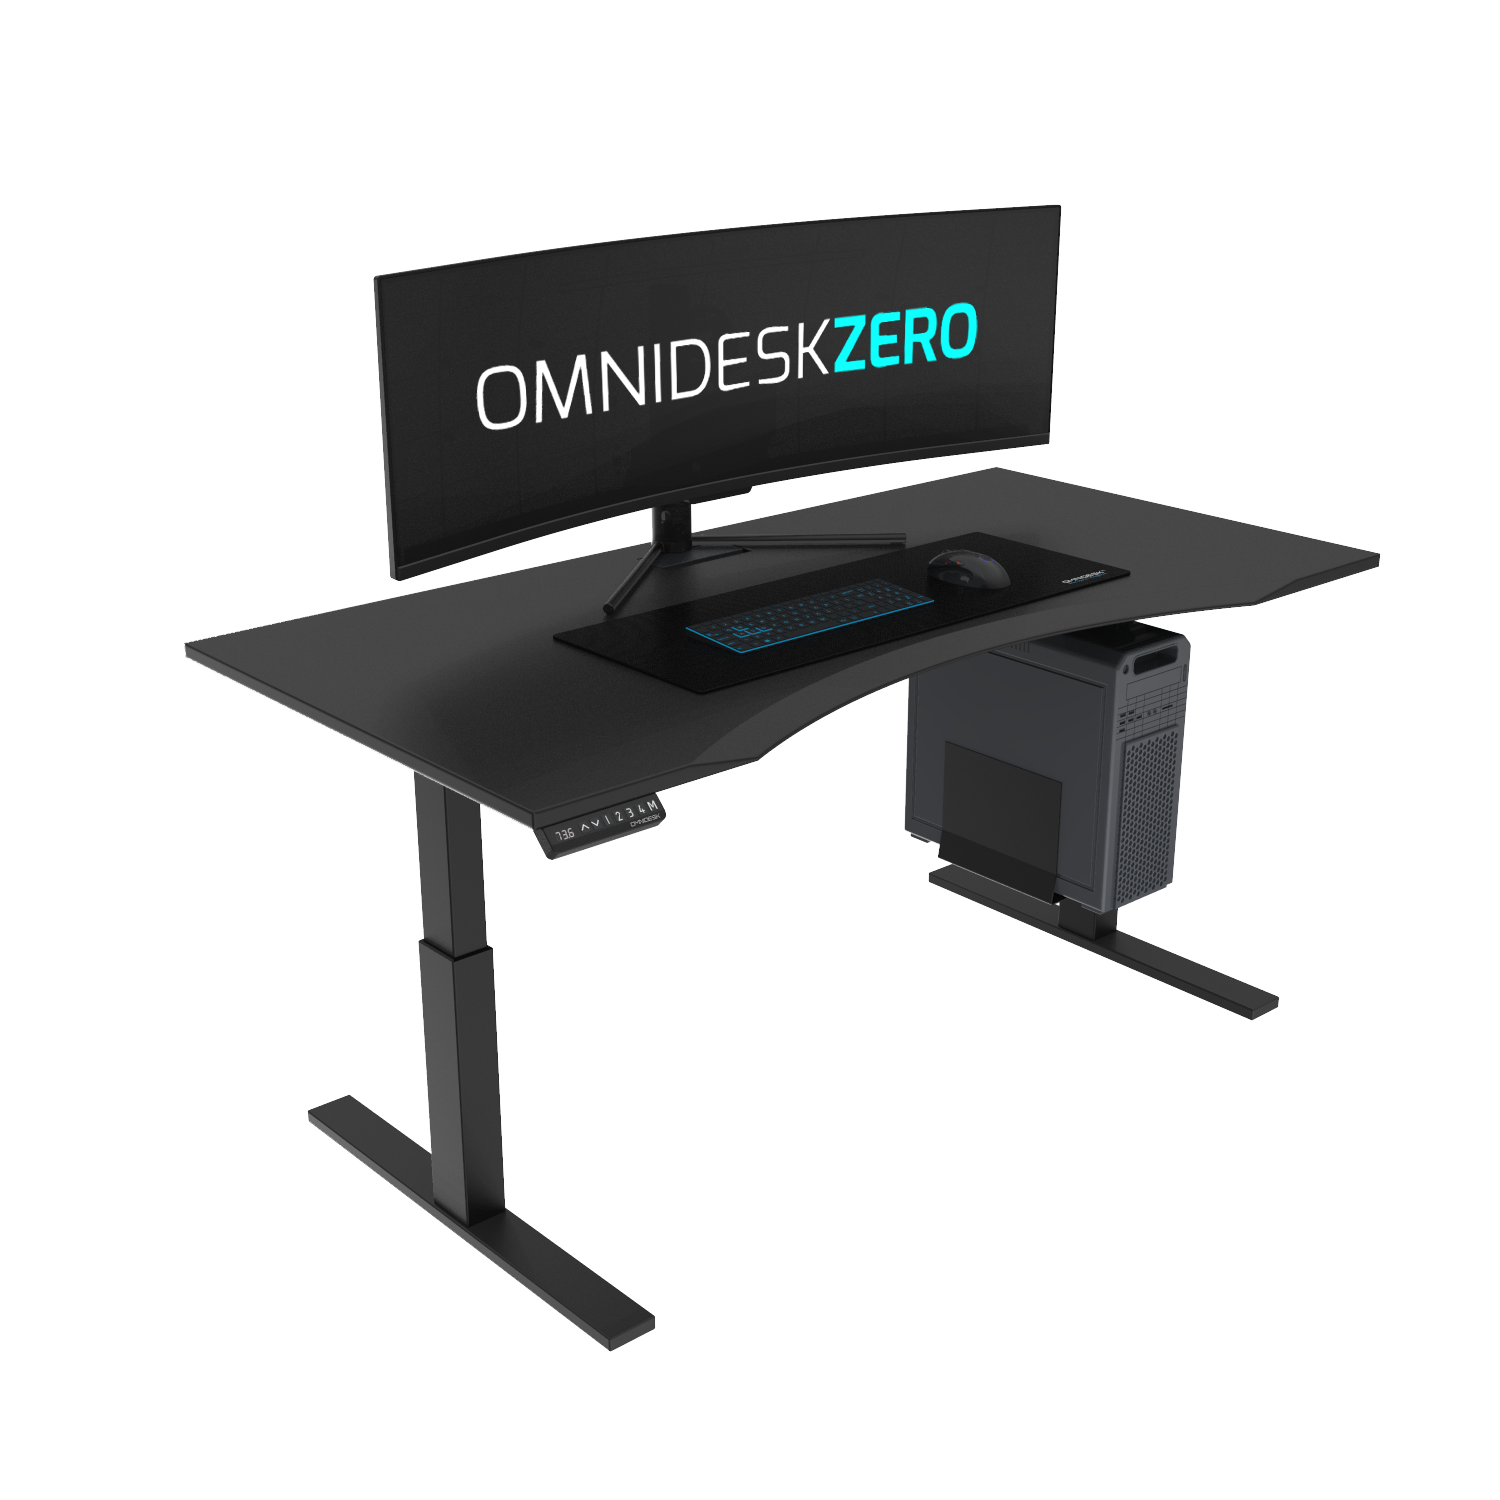 The Ultimate Standing Desk From Singapore